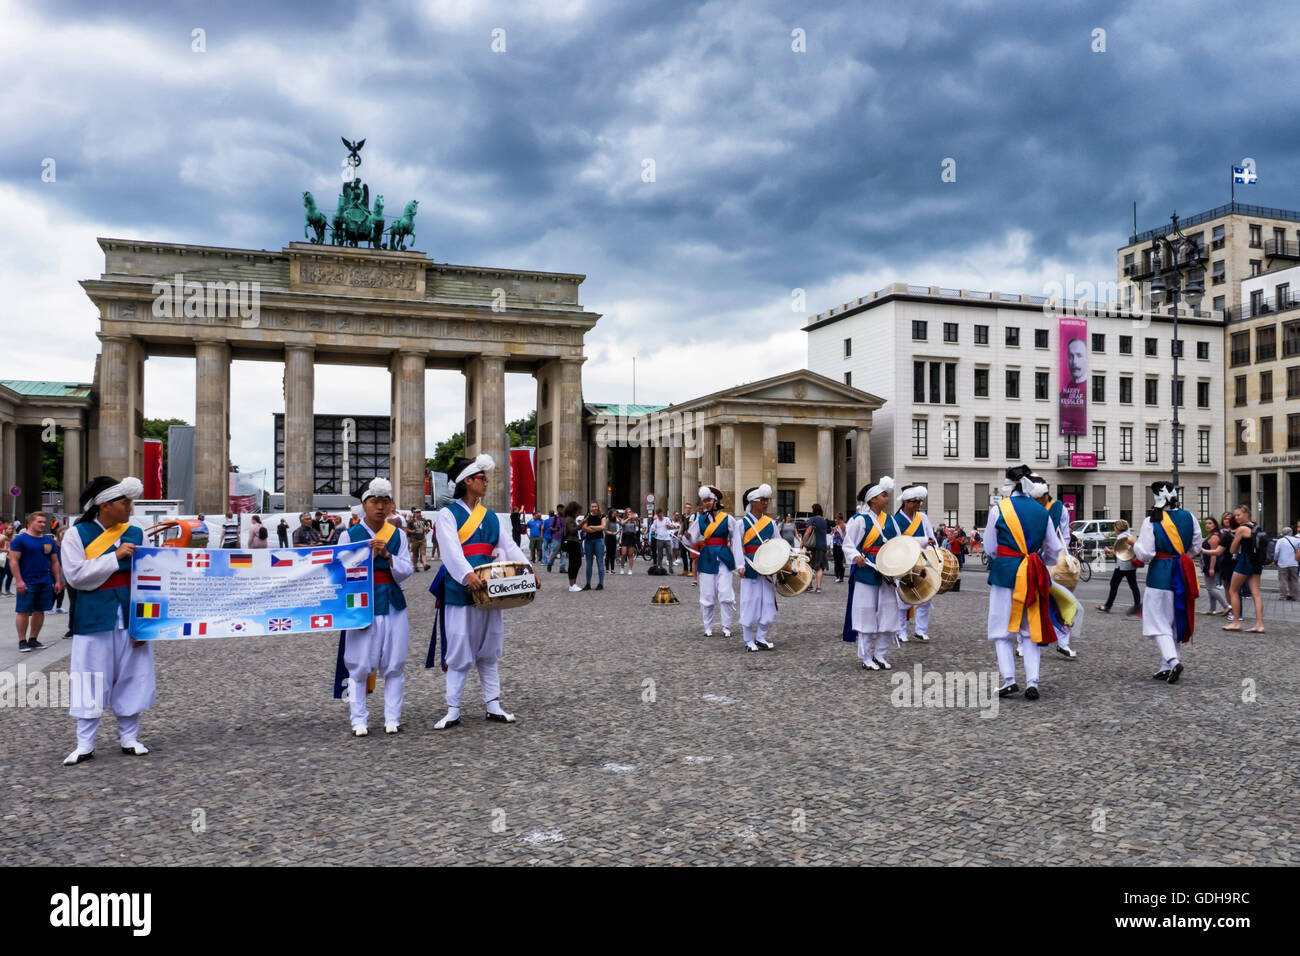 South Korean students perform traditional Pungmul dance to raise funds on school tour of Europe, Brandenburg Gate, Mitte, Berlin Stock Photo